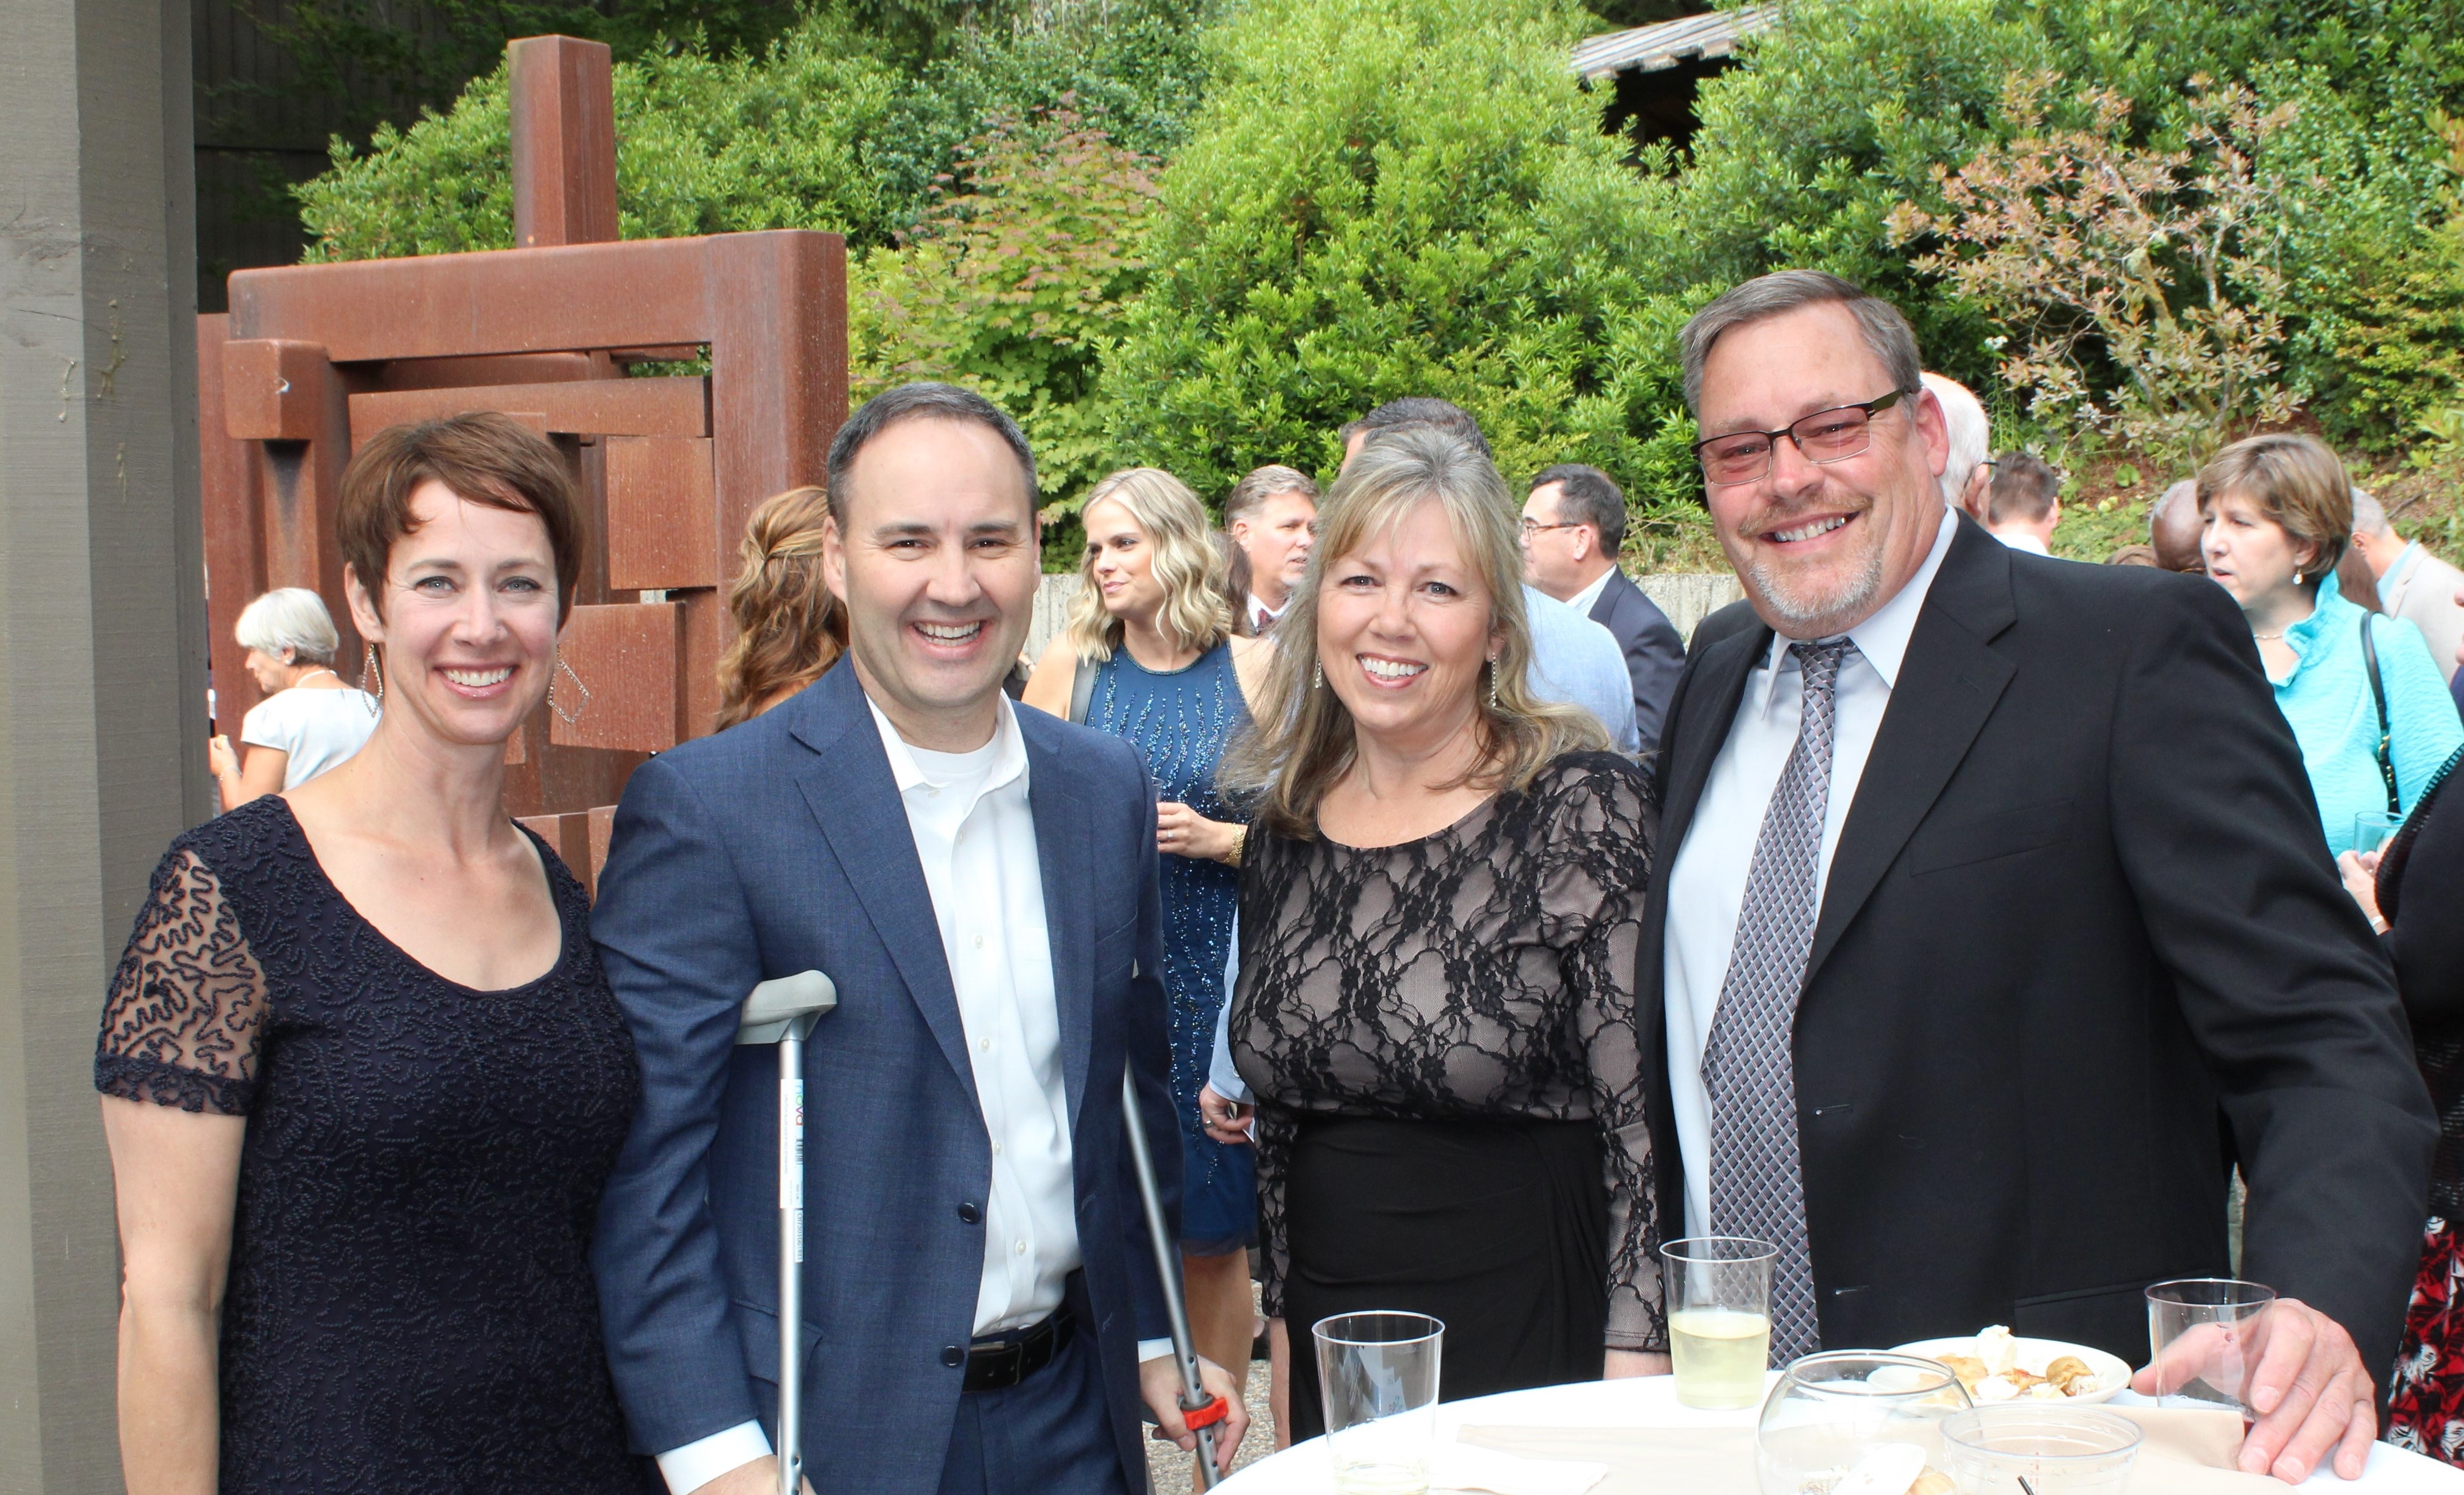 Among those enjoying the Summer Gala are, from left, Kerry and Doug Boysen, President and CEO of Samaritan Health Services; Virginia Riffle, COO of Samaritan North Lincoln Hospital, and her husband, Bob Riffle.